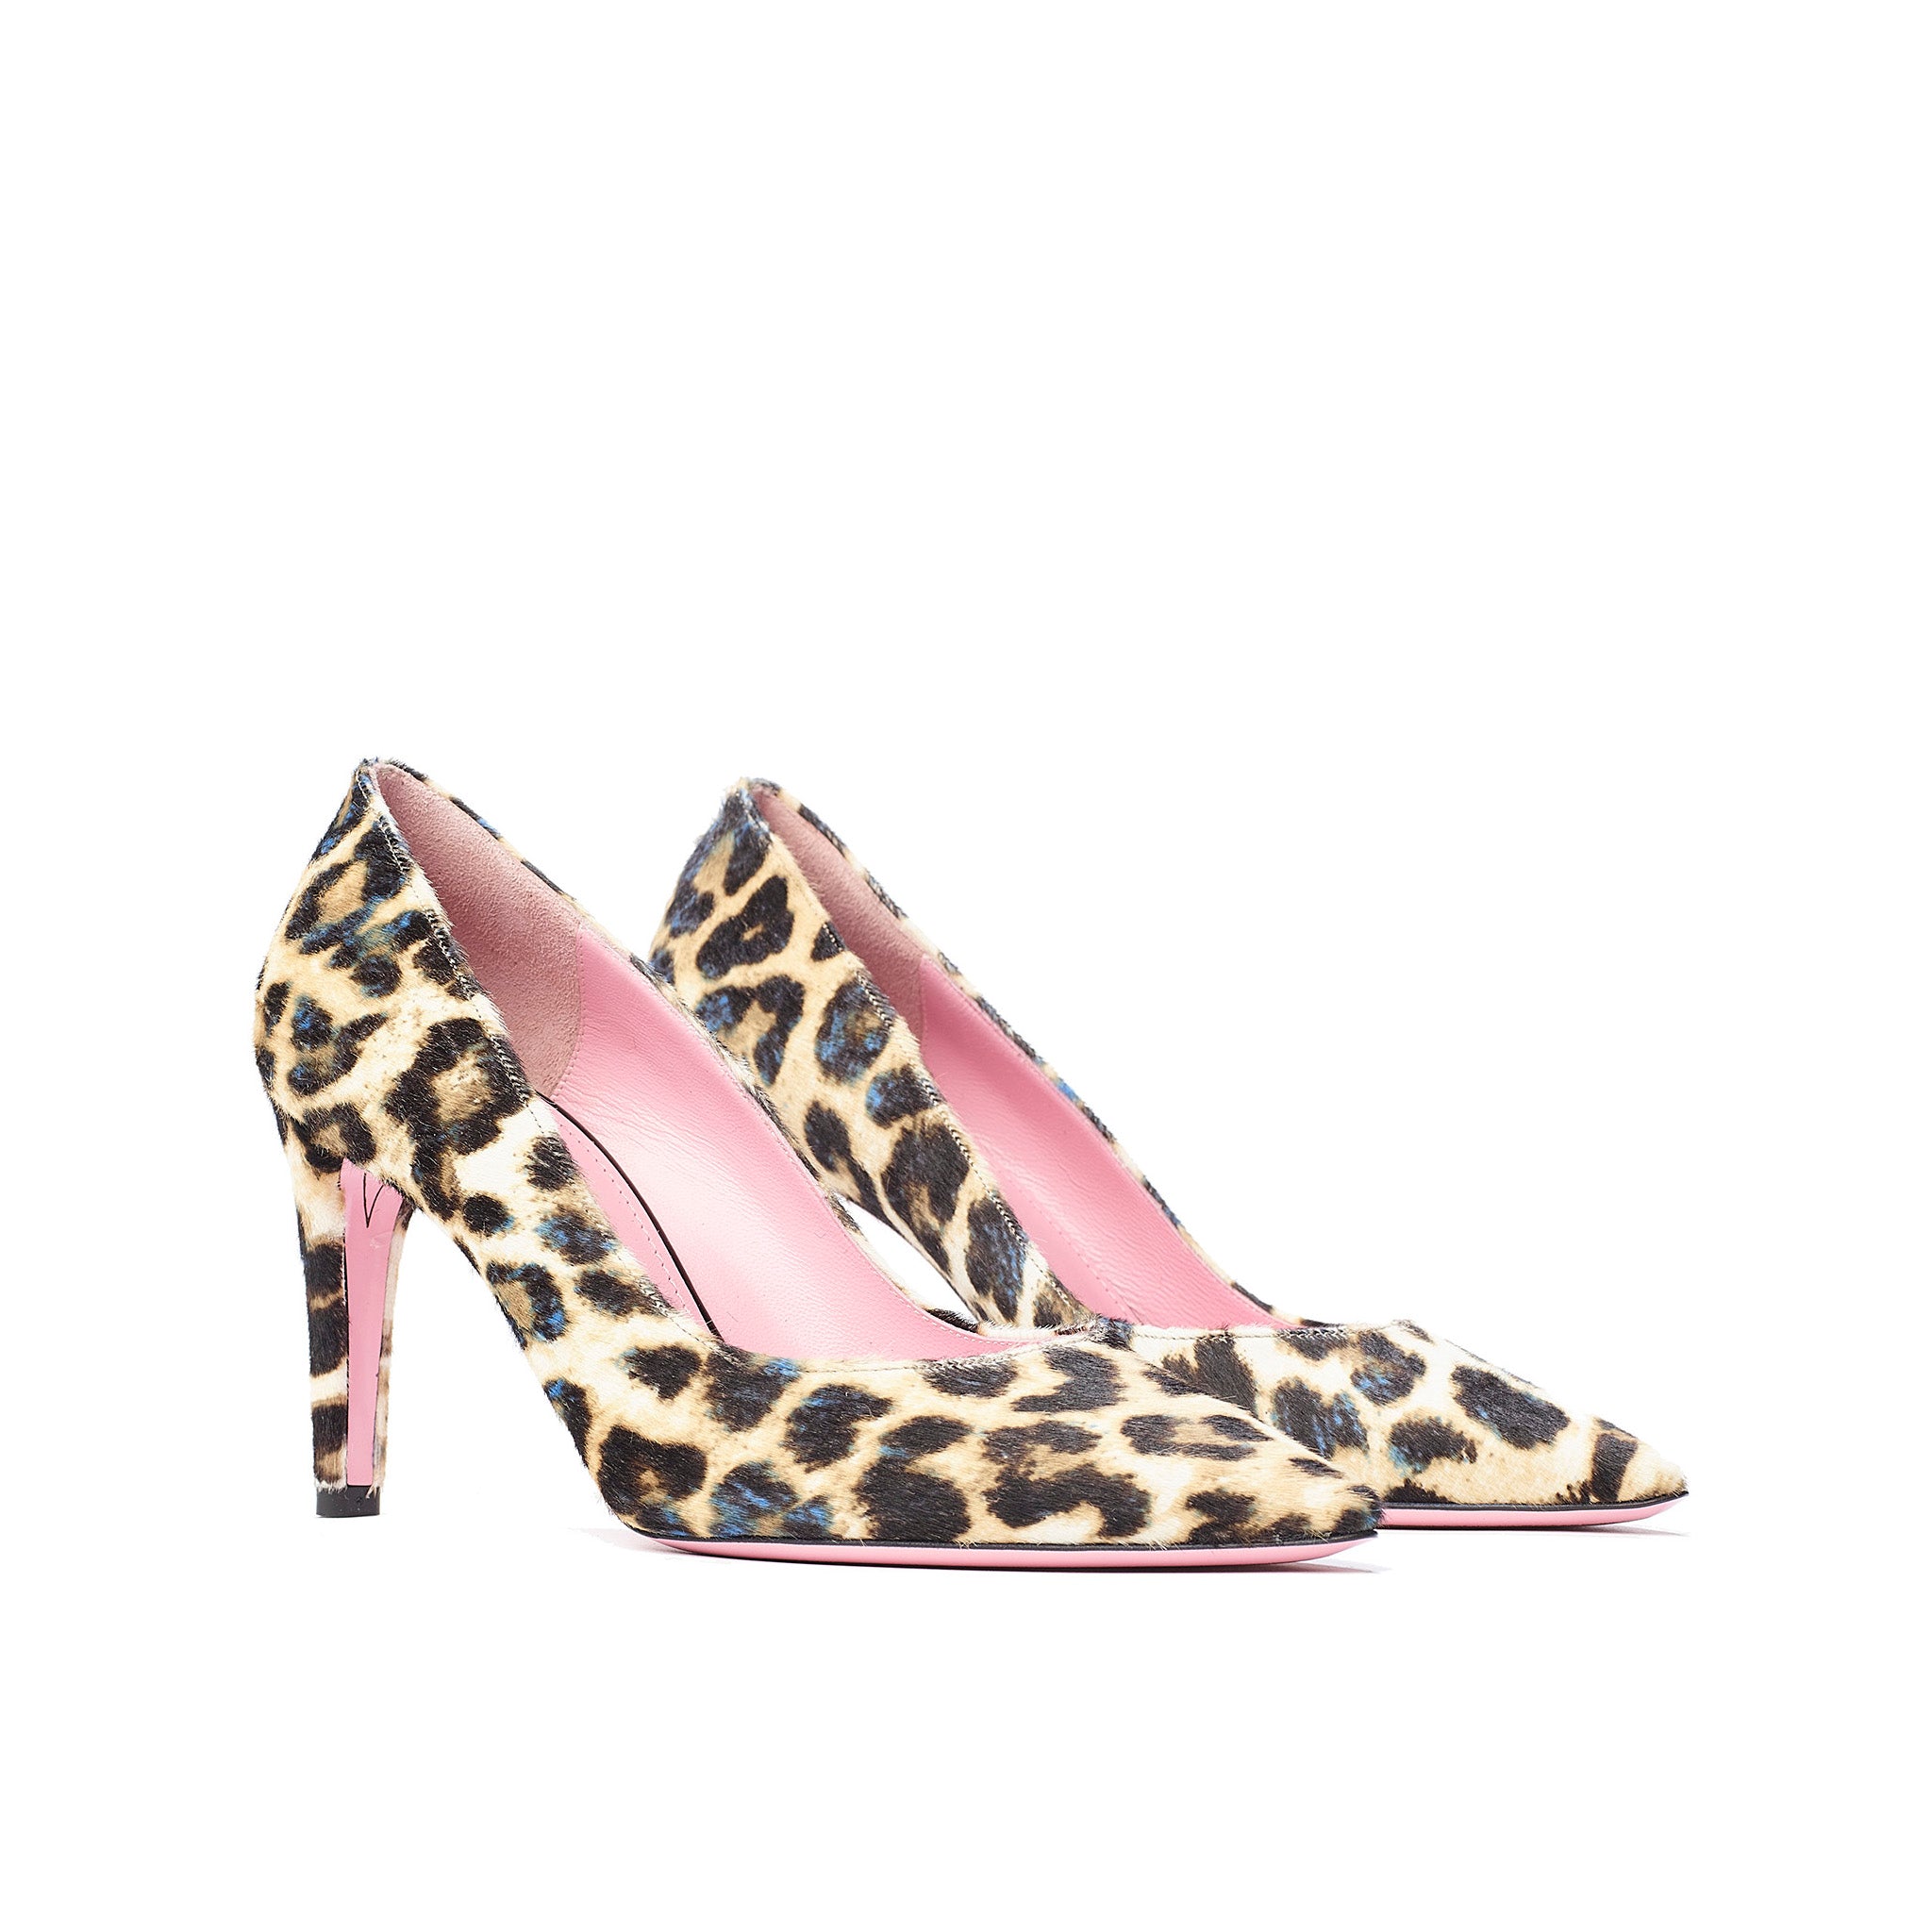 Phare classic pump in leopard pony hair 3/4 view 